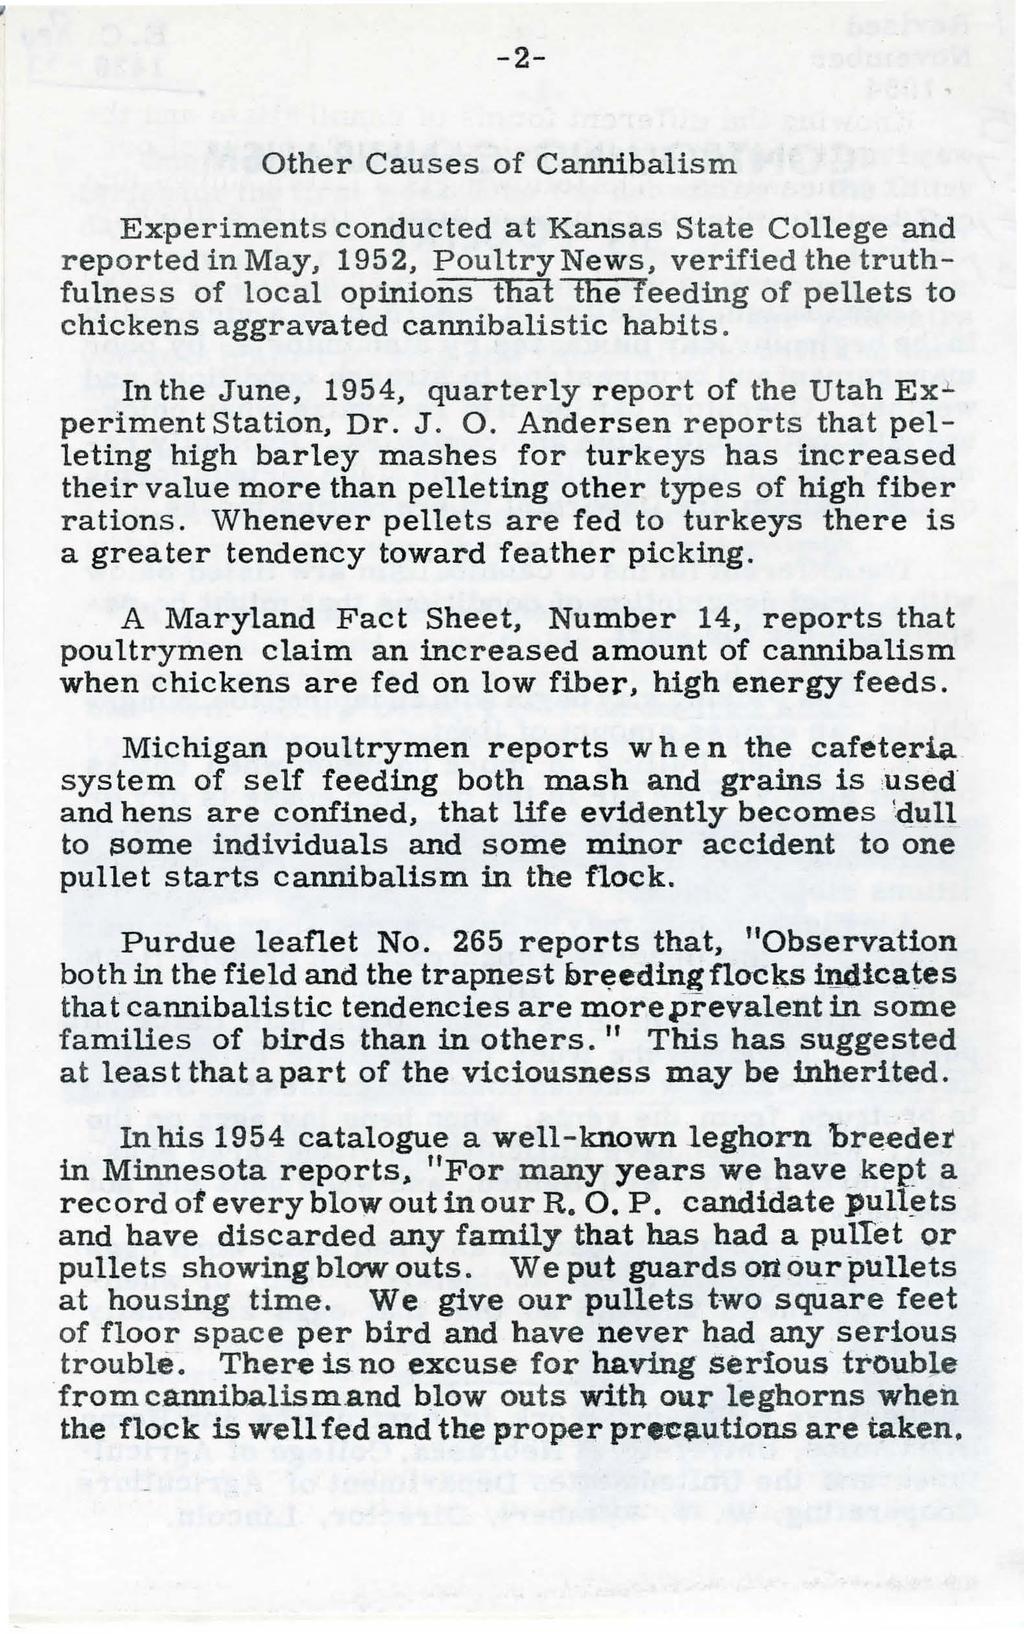 -2- Other Causes of Cannibalism Experiments conducted at Kansas State College and reported in May, 1952, Poultry News, verified the truthfulness of local opinions that the feeding of pellets to